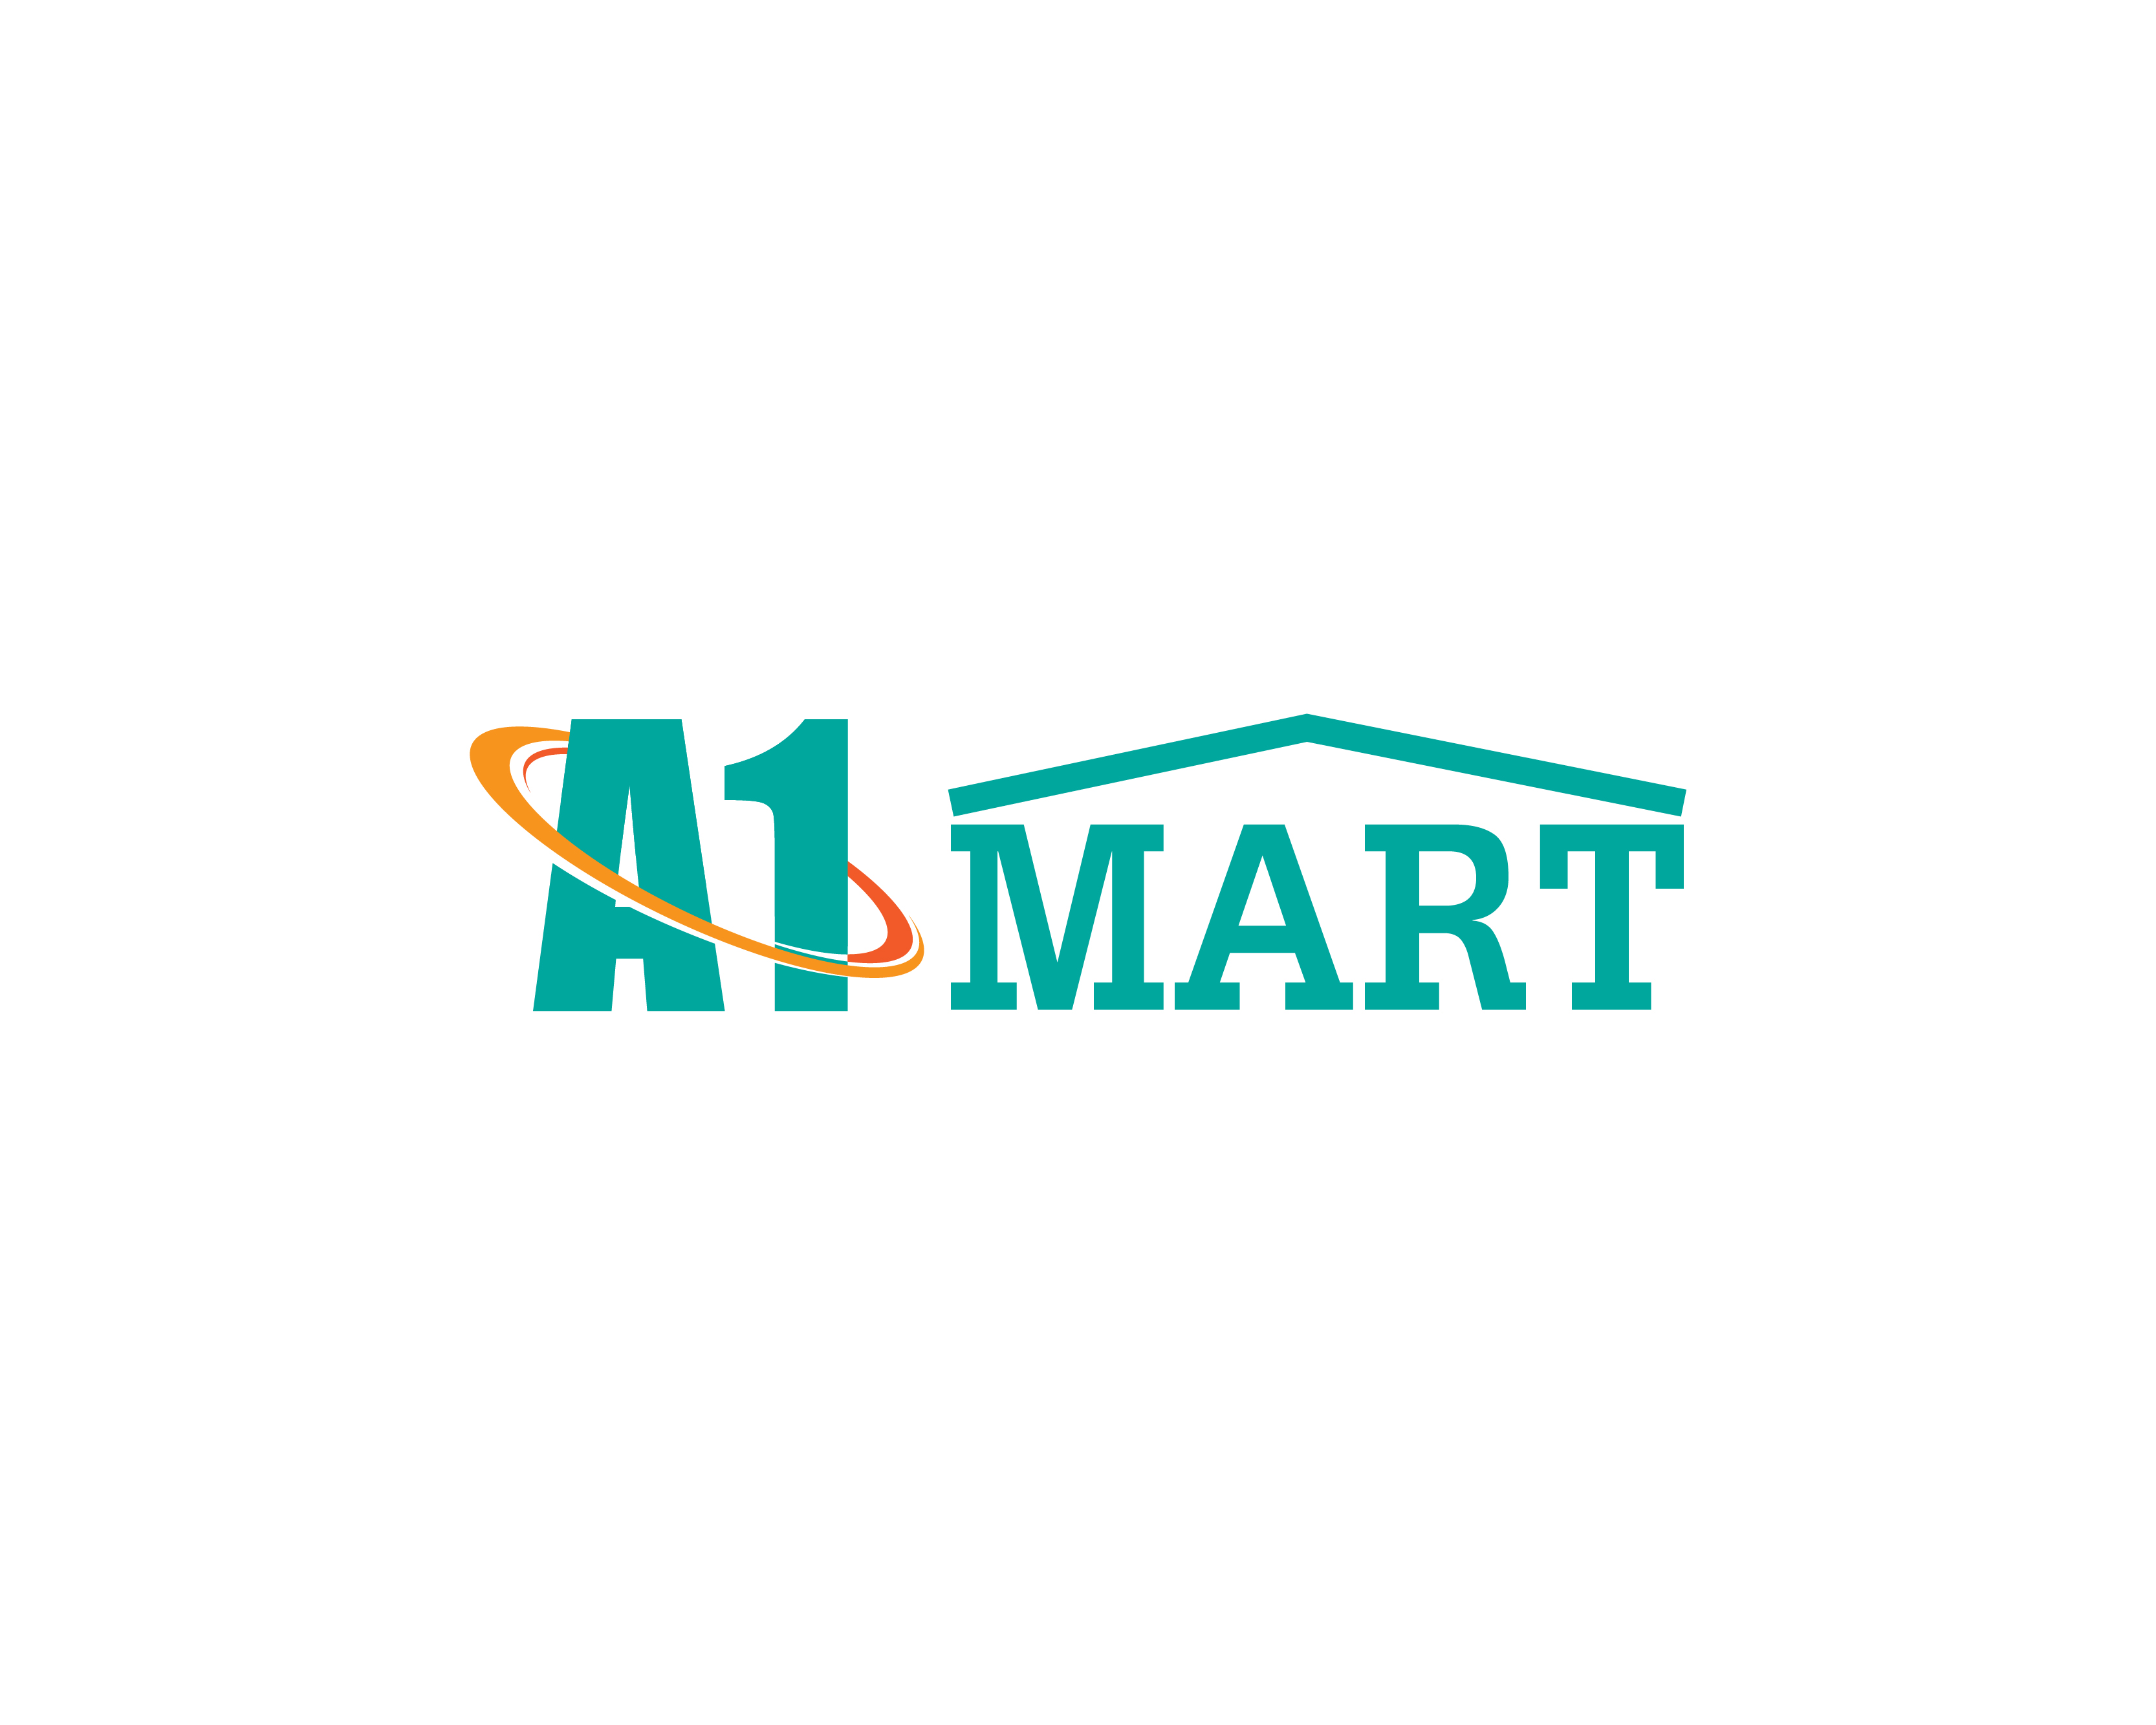 Download Dmart Logo PNG And Vector (PDF, SVG, Ai, EPS) Free, 59% OFF